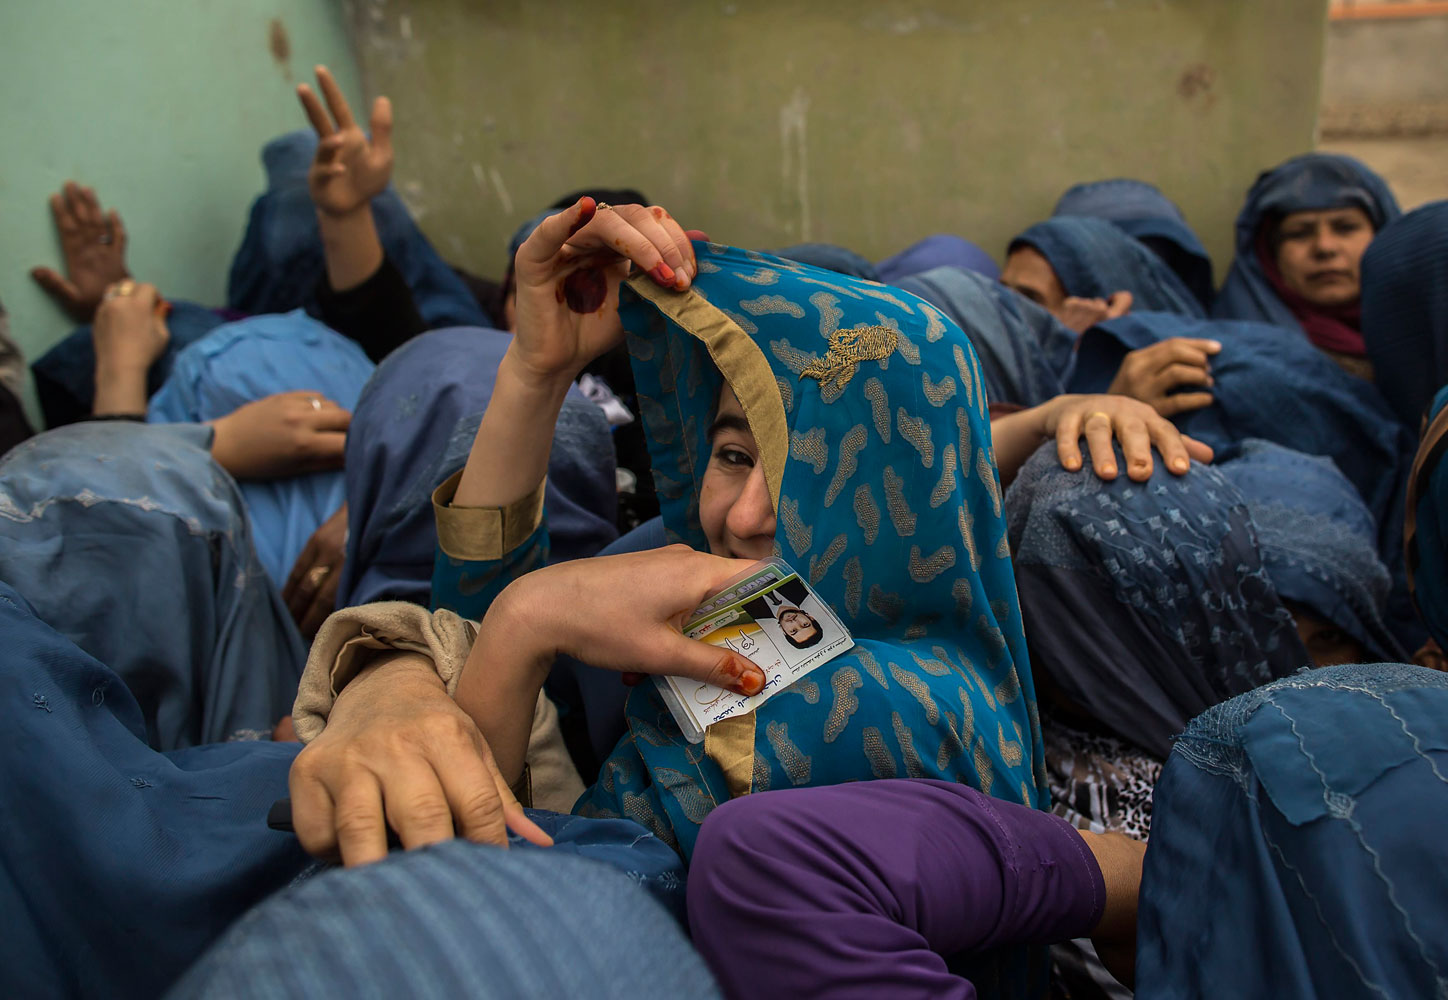 Afghan women wait to cast their ballots at a polling station in Mazar-i-sharif